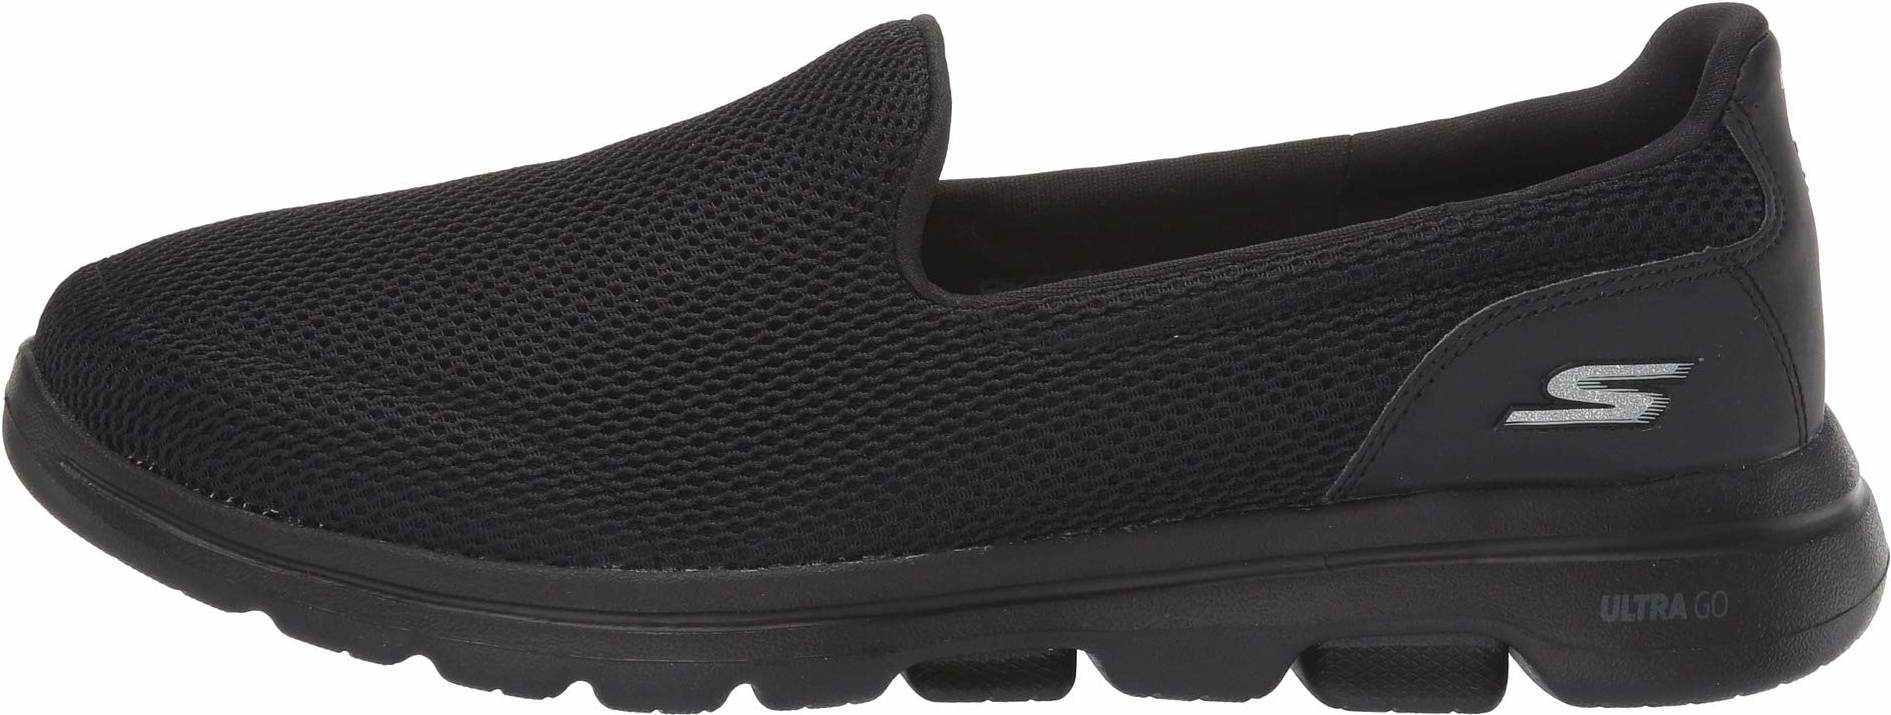 Facts, sneakers skechers goldn gurl 111 blk black Review 2022, Skechers FW  Go Walk 6 Womens Trainers, Deals (£42) | Mairie-ascainShops